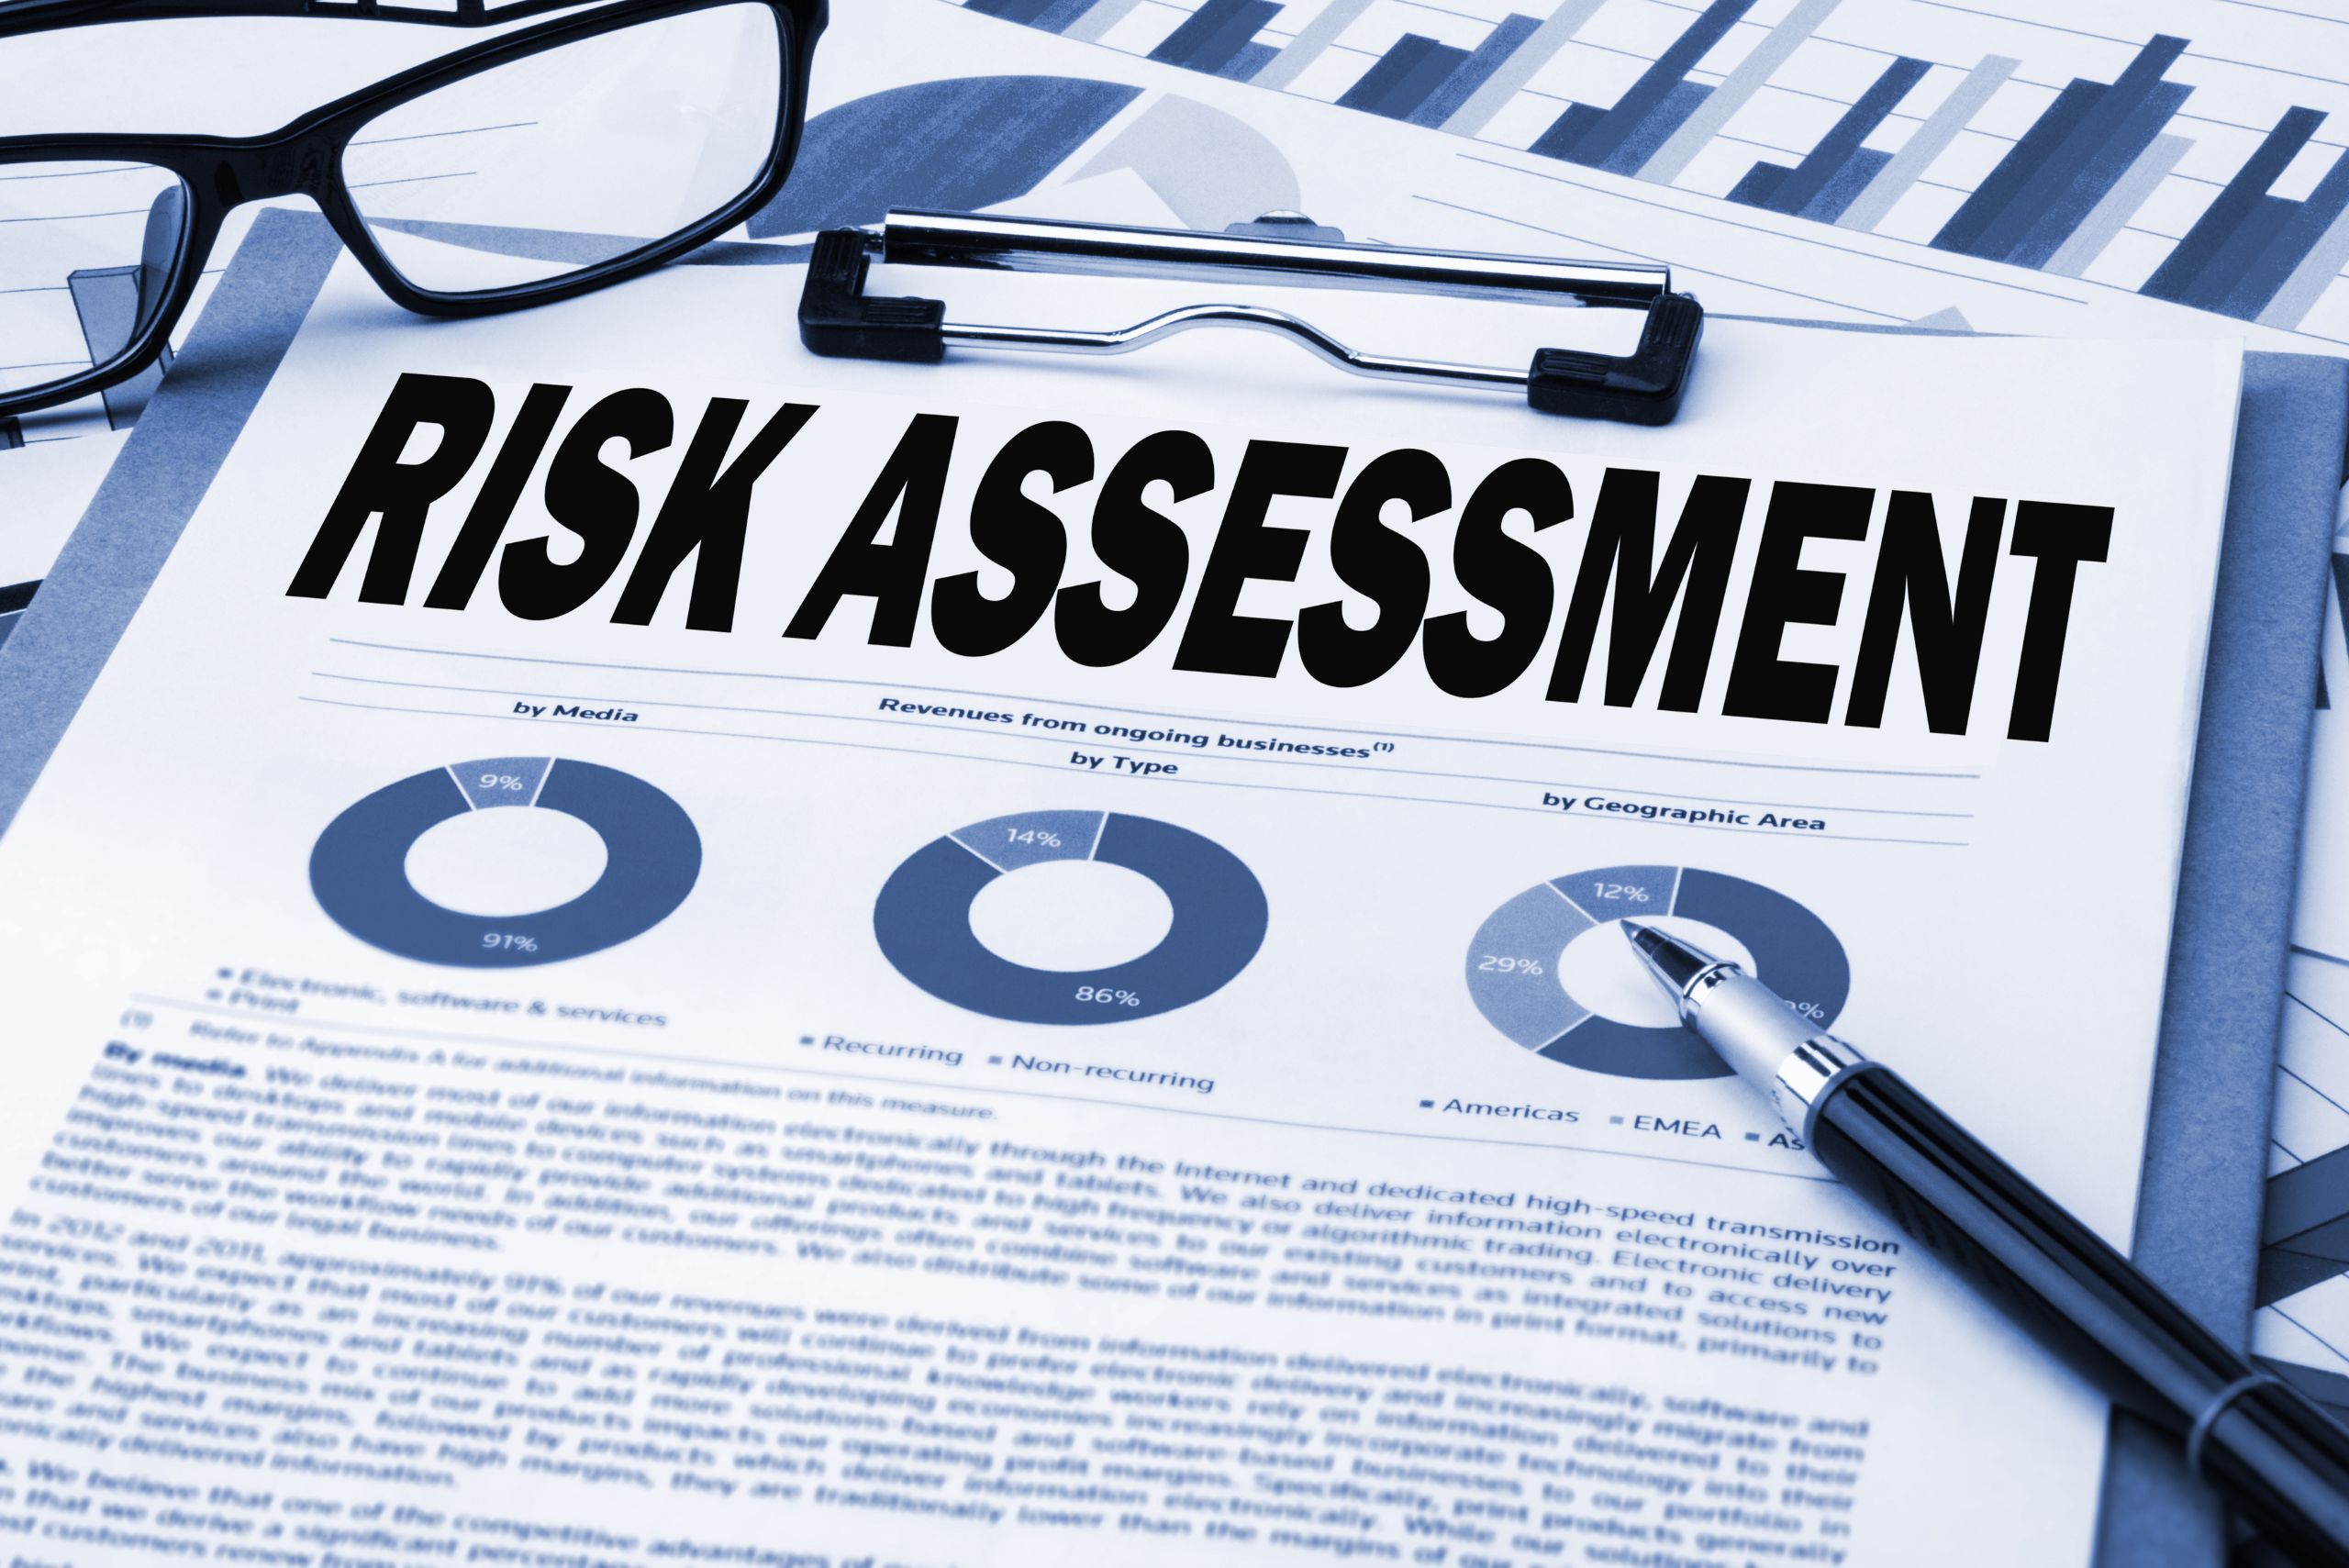 risk assessment analysis concept on clipboard